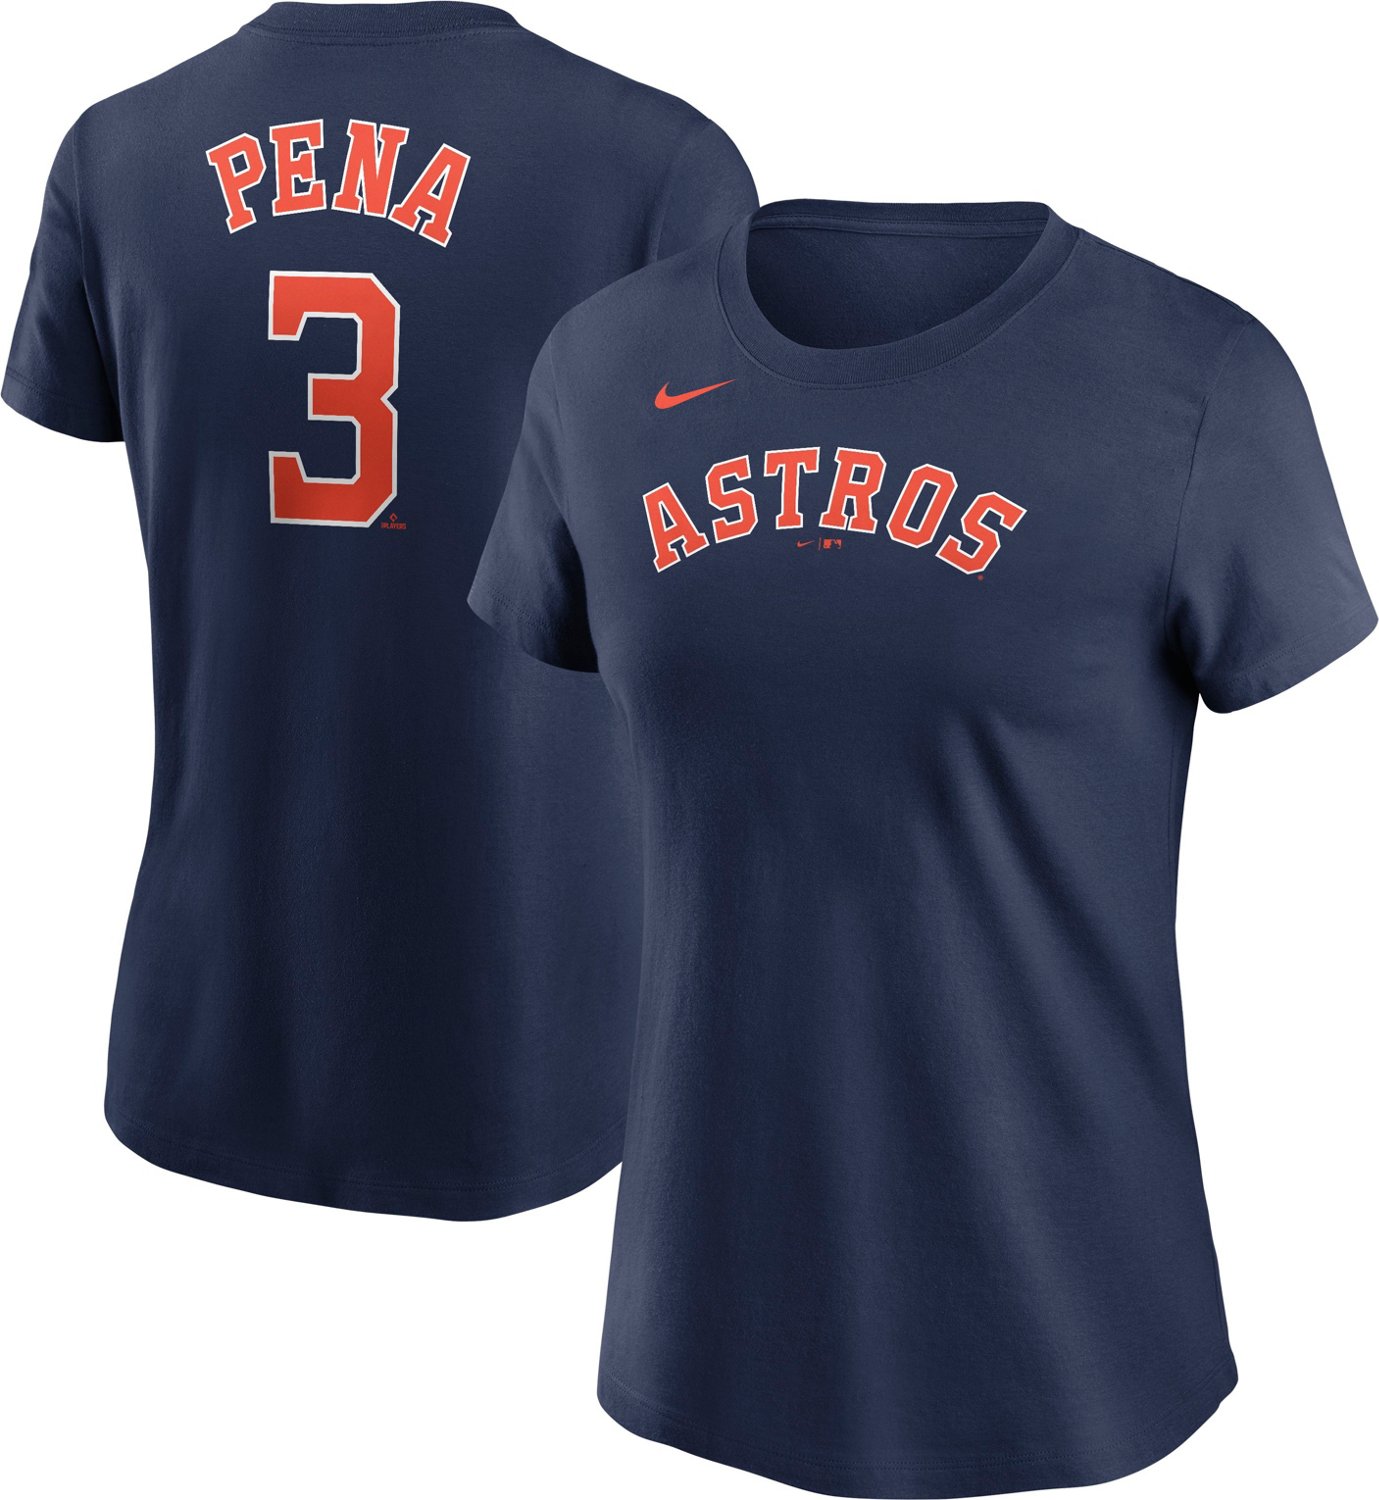  Pinkerton Academy Astros Tank Top : Clothing, Shoes & Jewelry